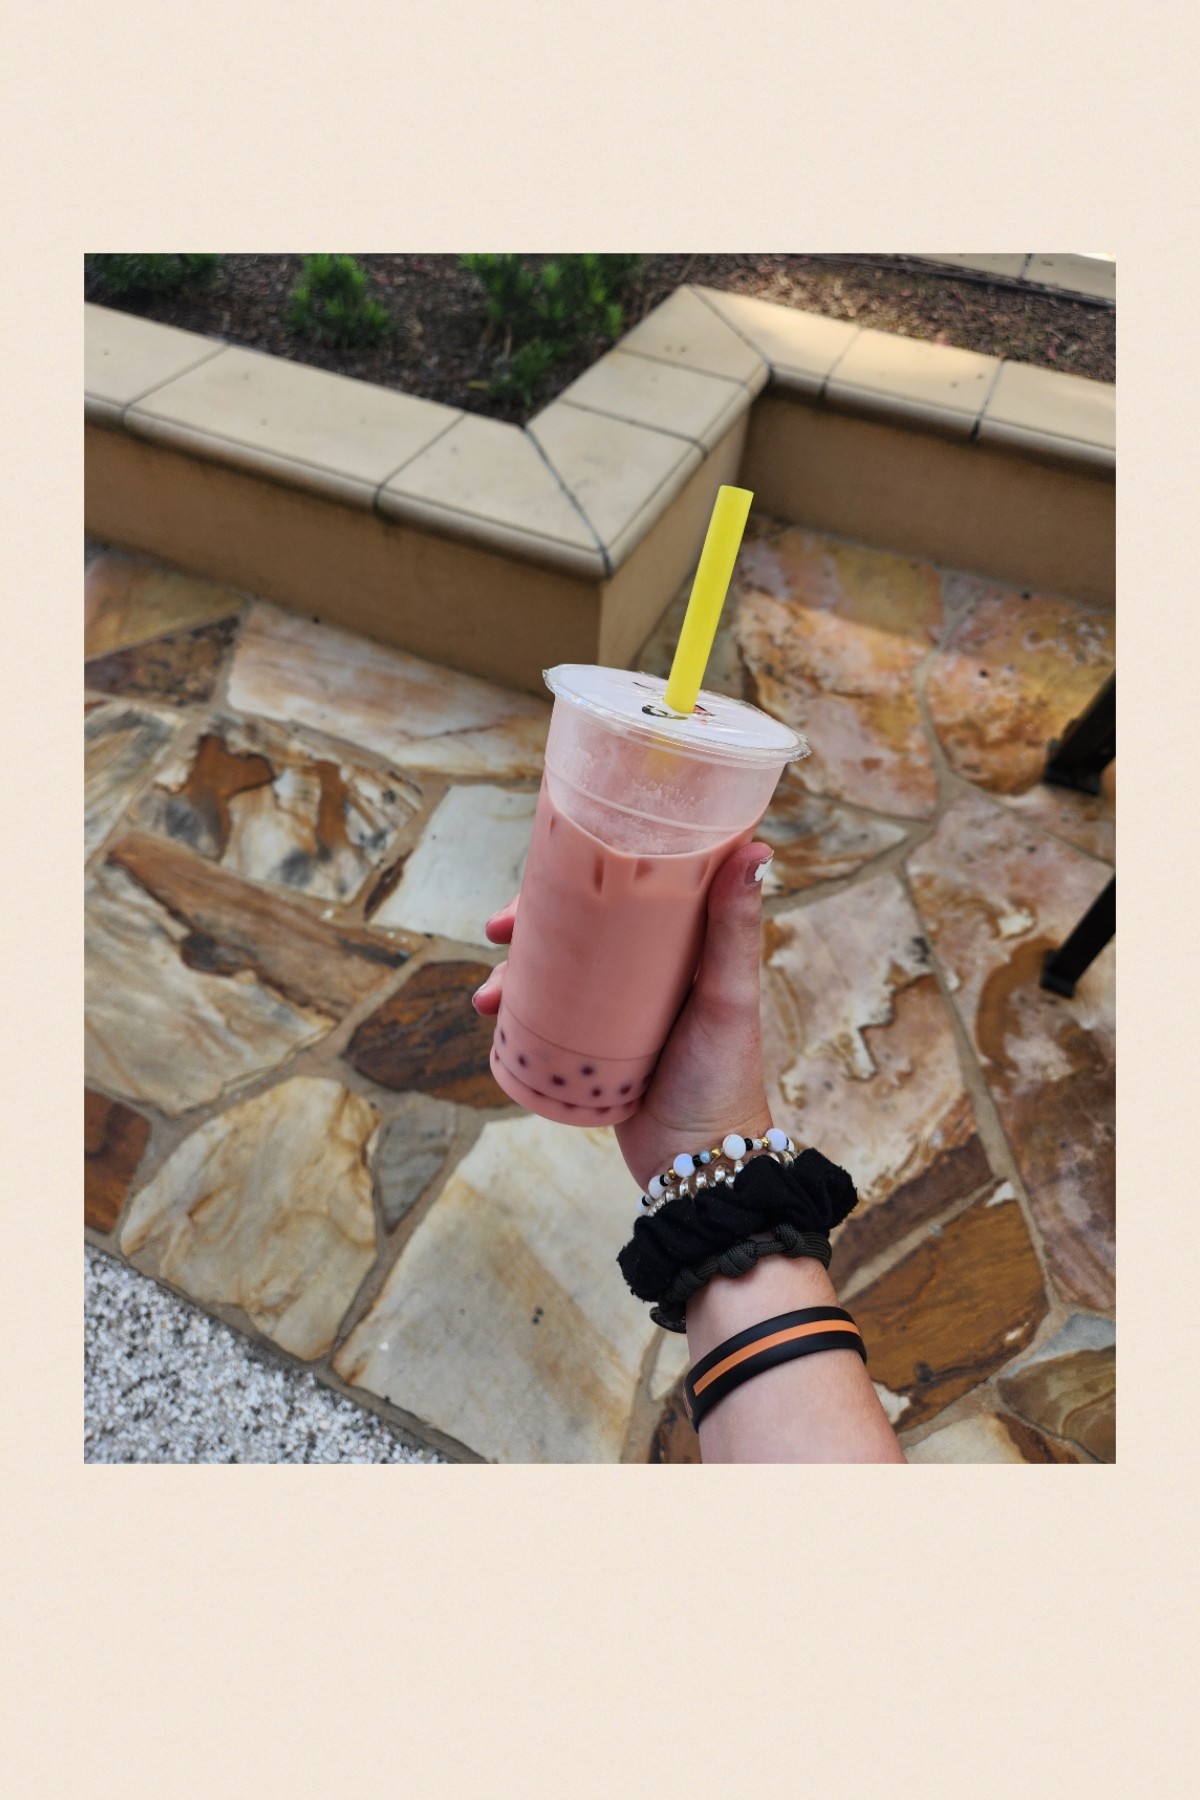 BOBA!! this one's strawberry milk tea with strawberry popping boba!! it's so good!😁✌️🩷
(9.19.23)